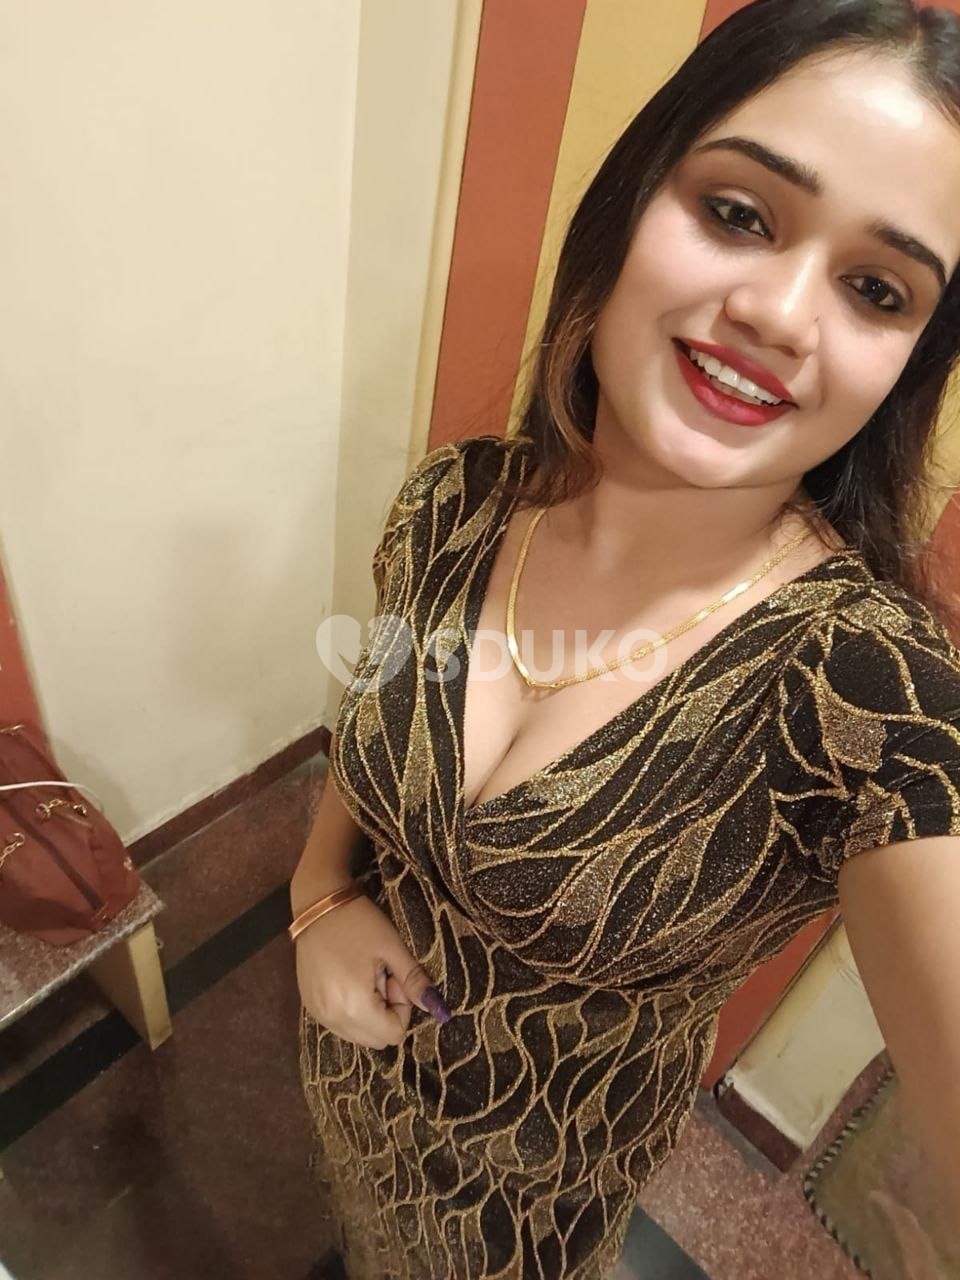 Kukatpally........low price 🥰100% SAFE AND SECURE TODAY LOW PRICE UNLIMITED ENJOY HOT COLLEGE GIRL HOUSEWIFE AUNTIES 